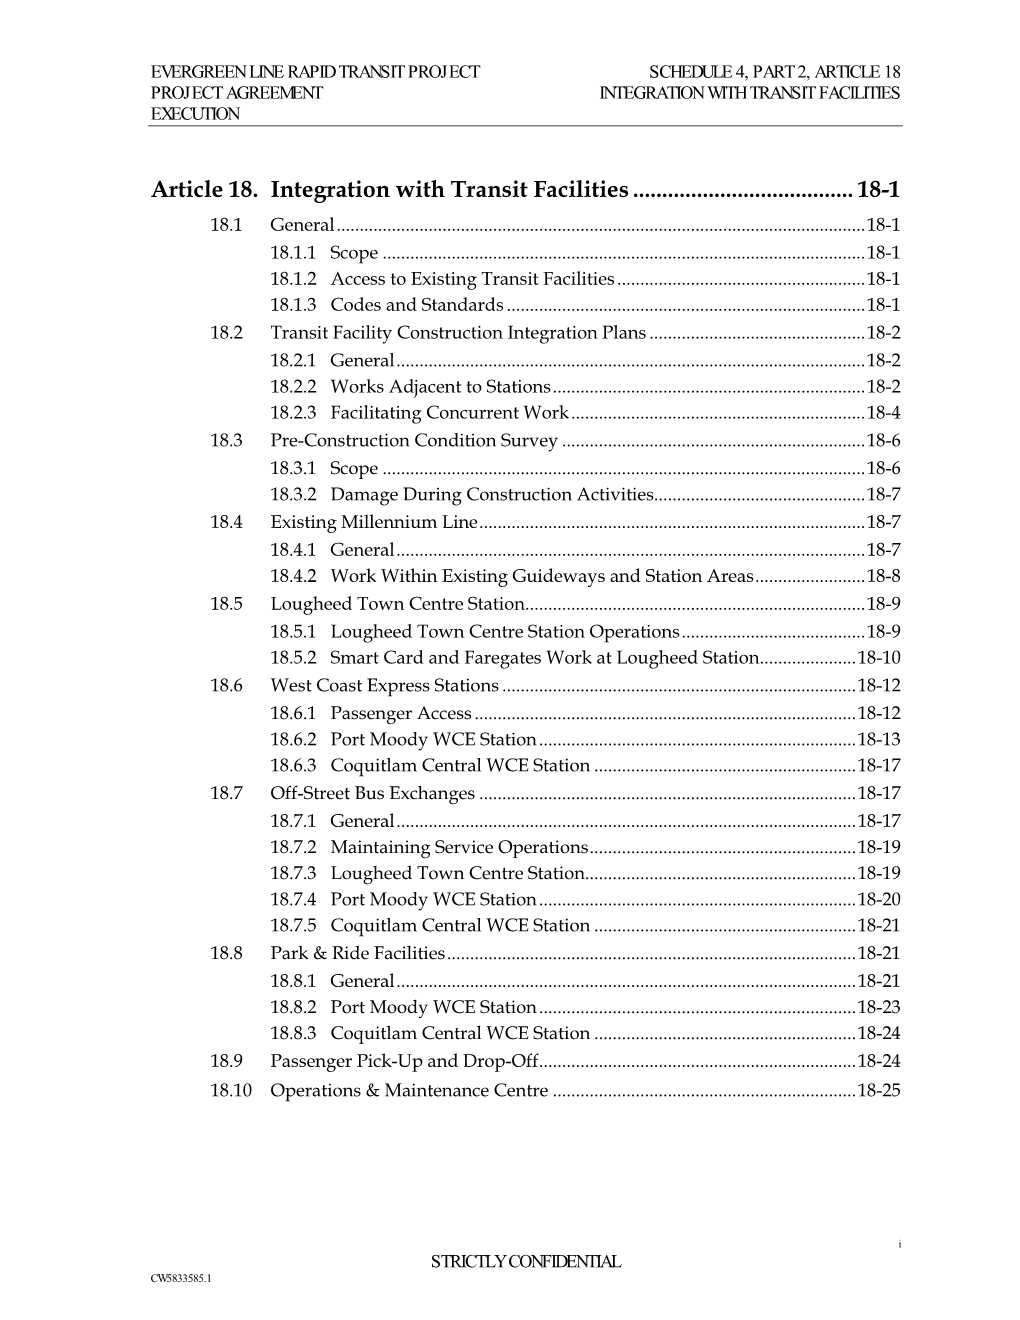 Schedule 4, Part 2, Article 18 Project Agreement Integration with Transit Facilities Execution